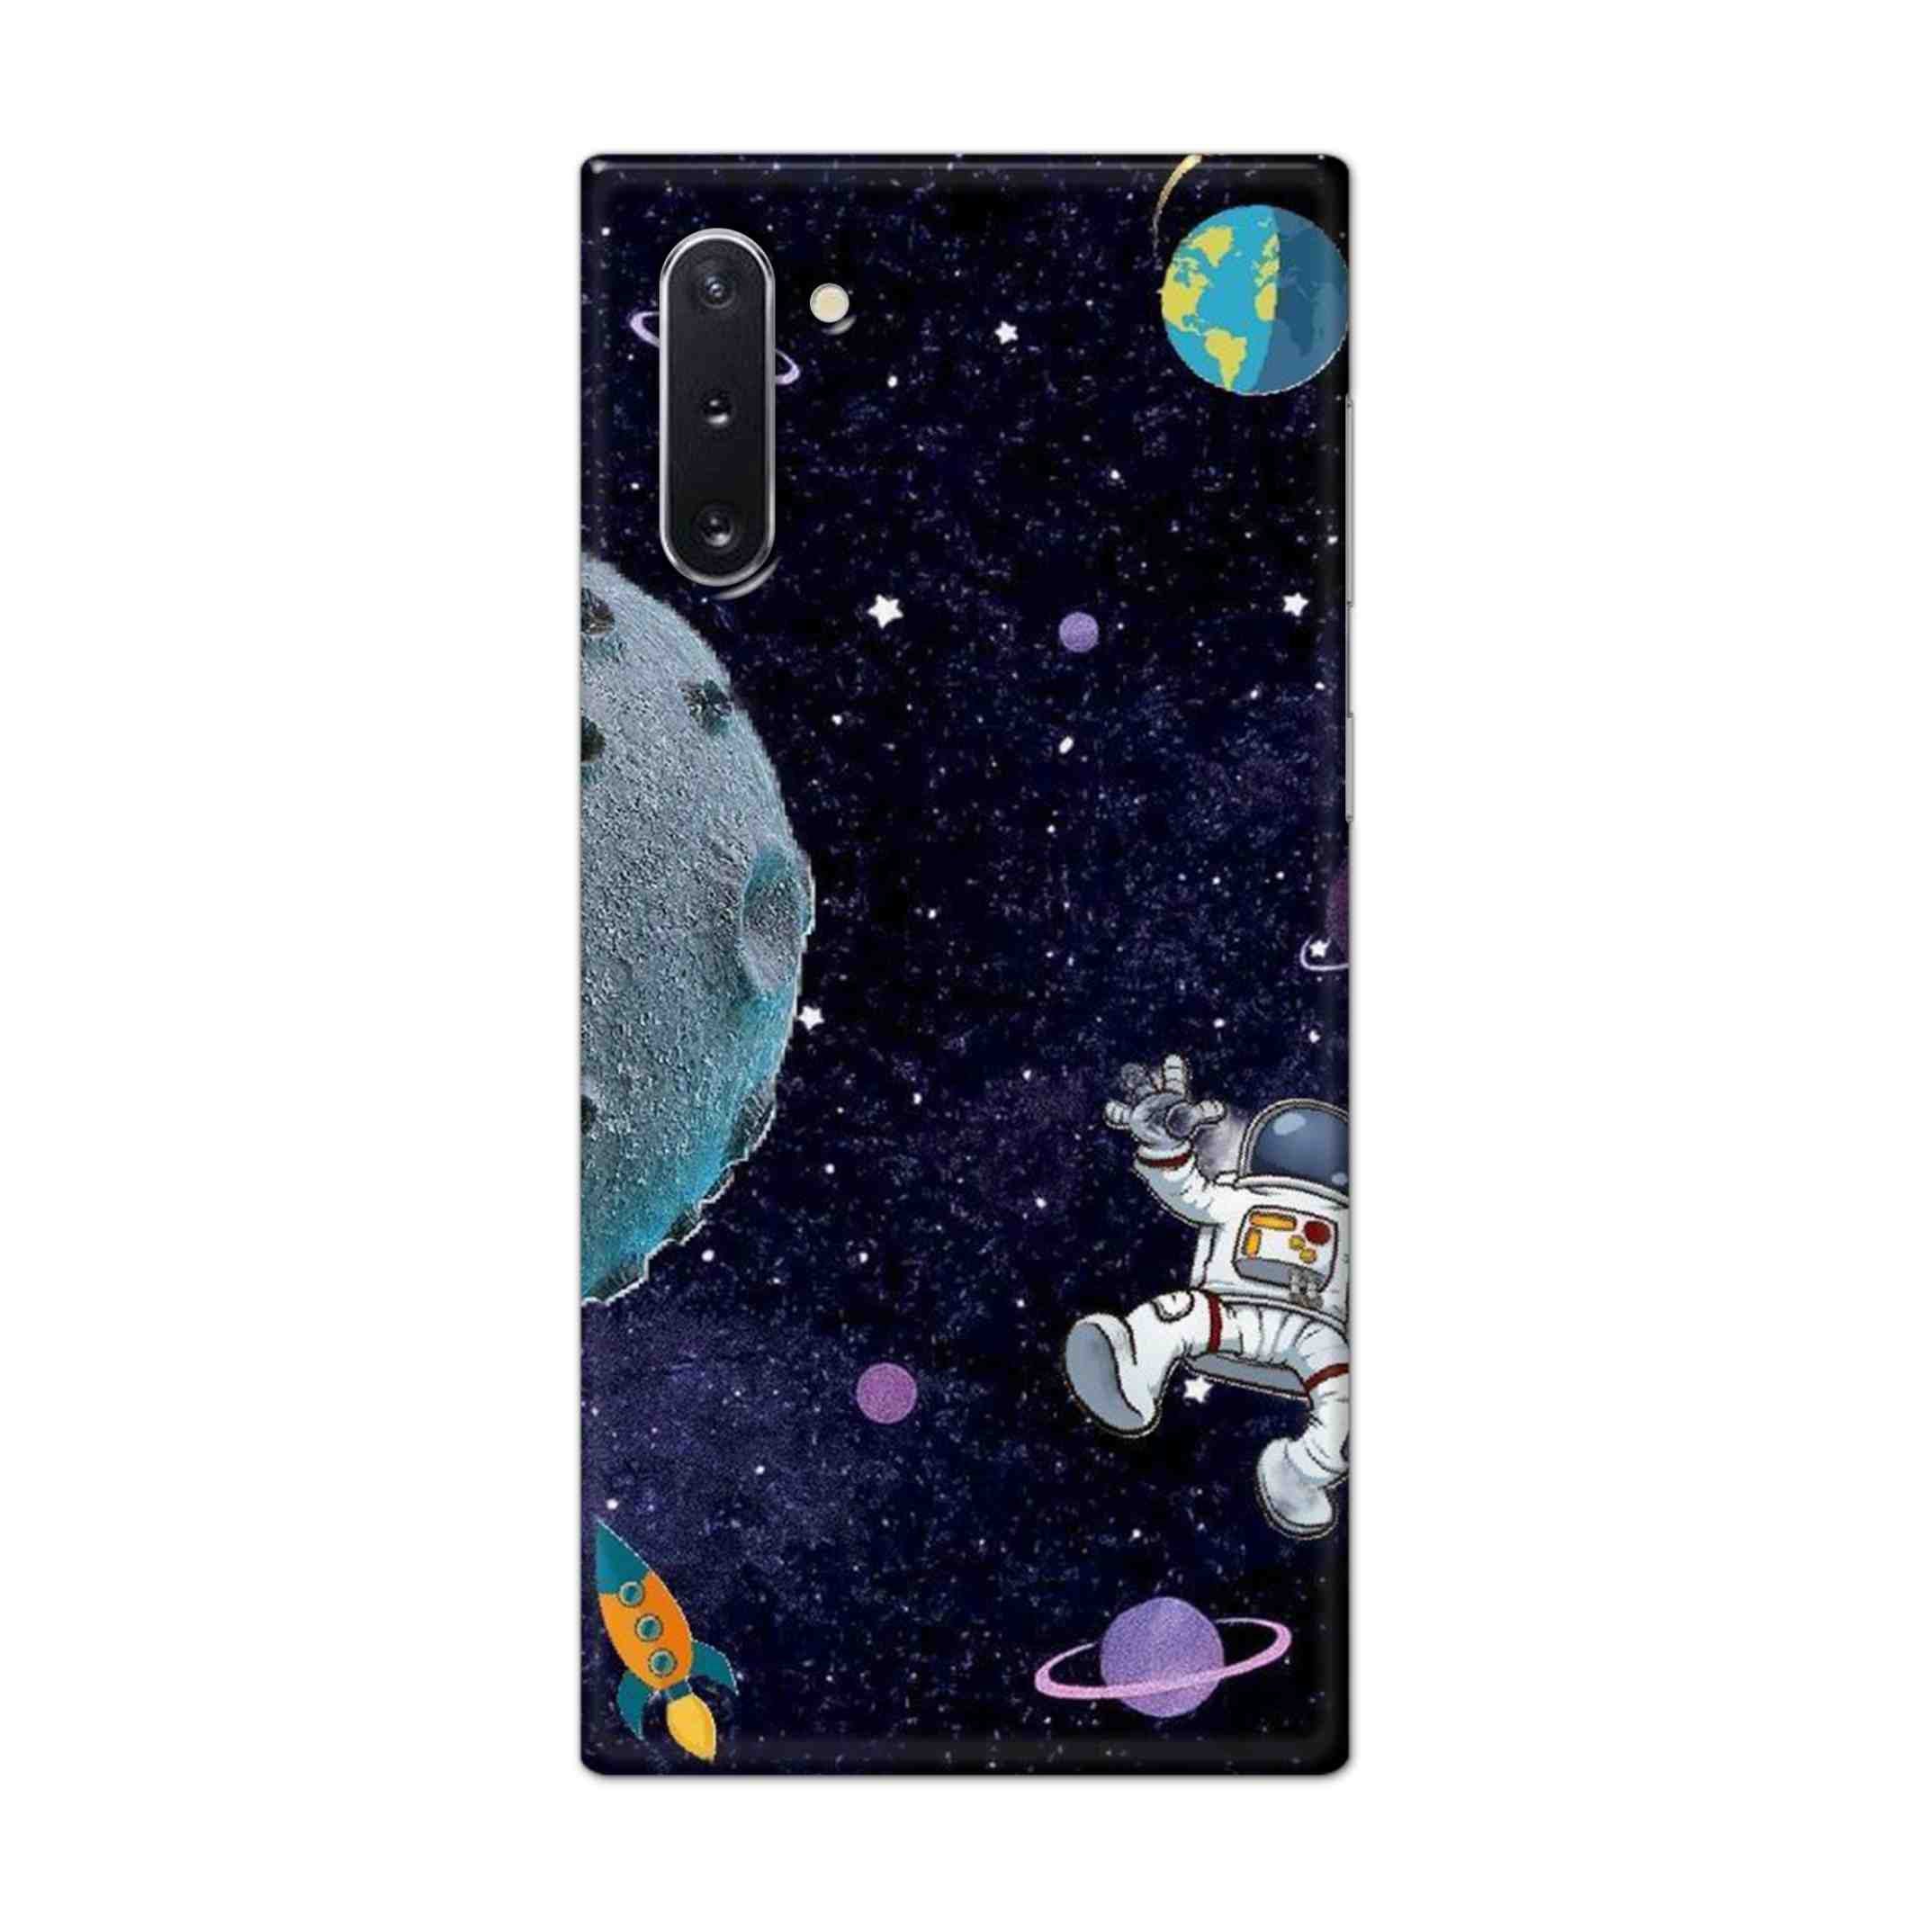 Buy Space Hard Back Mobile Phone Case Cover For Samsung Galaxy Note 10 Online